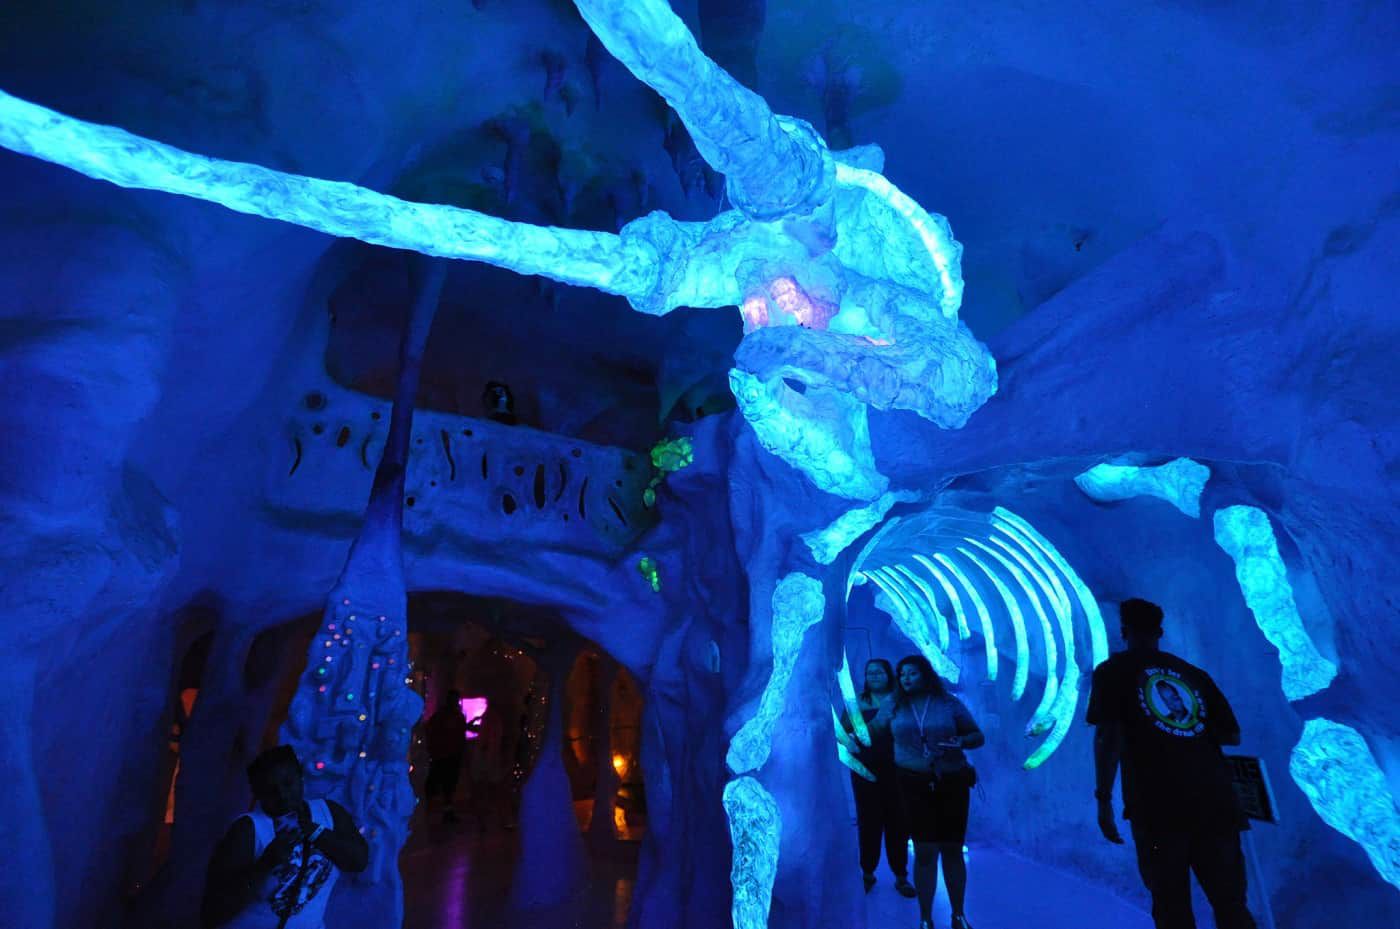 ART REIMAGINED: The magic of Meow Wolf in Santa Fe